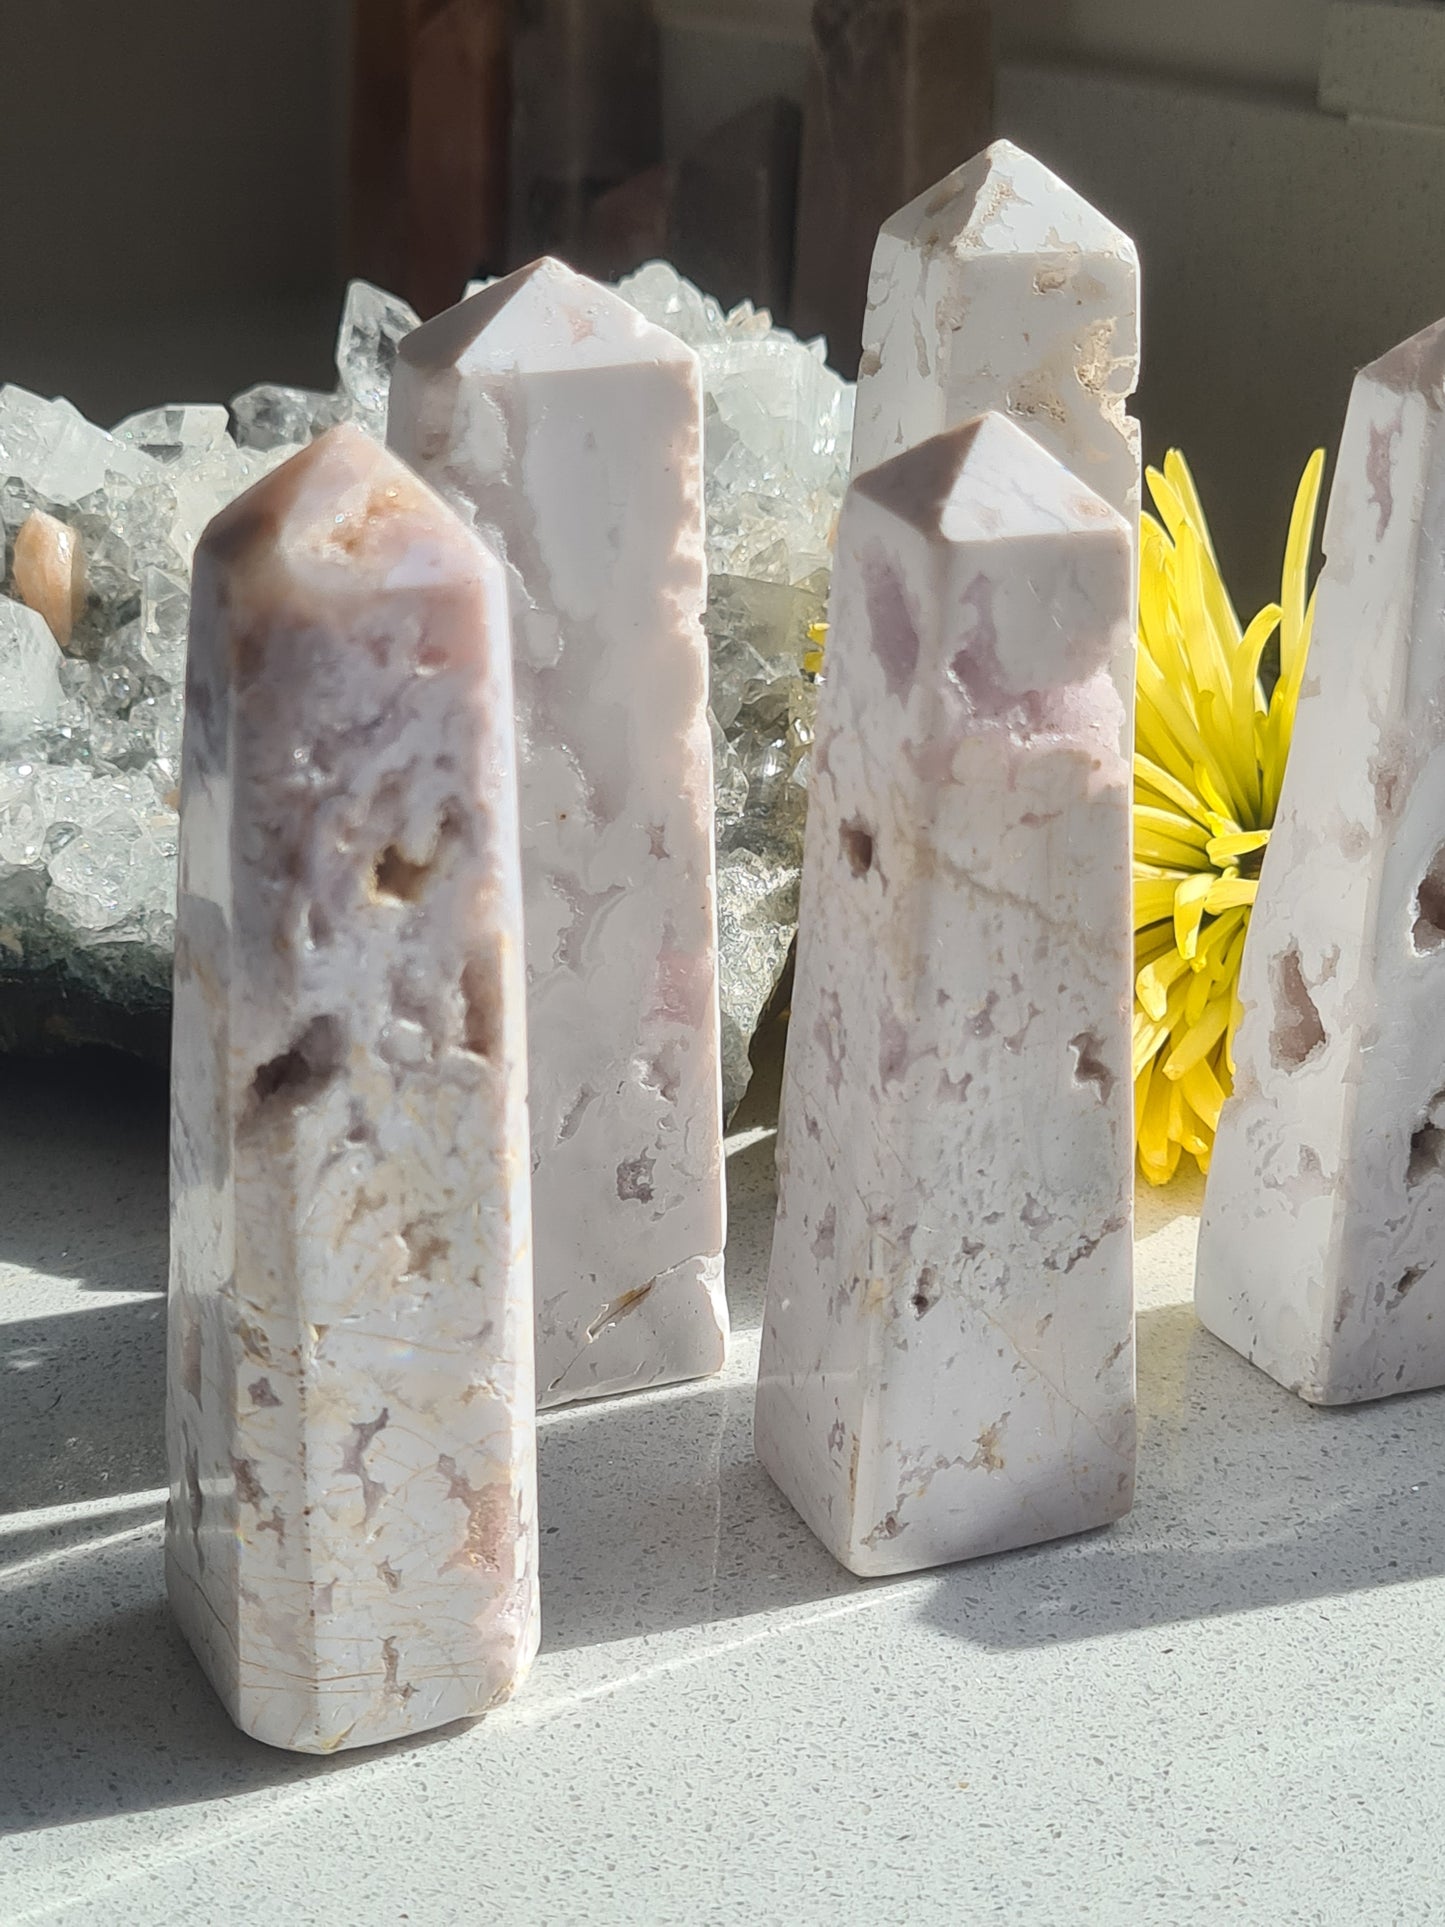 Crystalline Snow White Agate Obelisks, pictured in natural daylight showing their sparkling druzy caves and natural features.